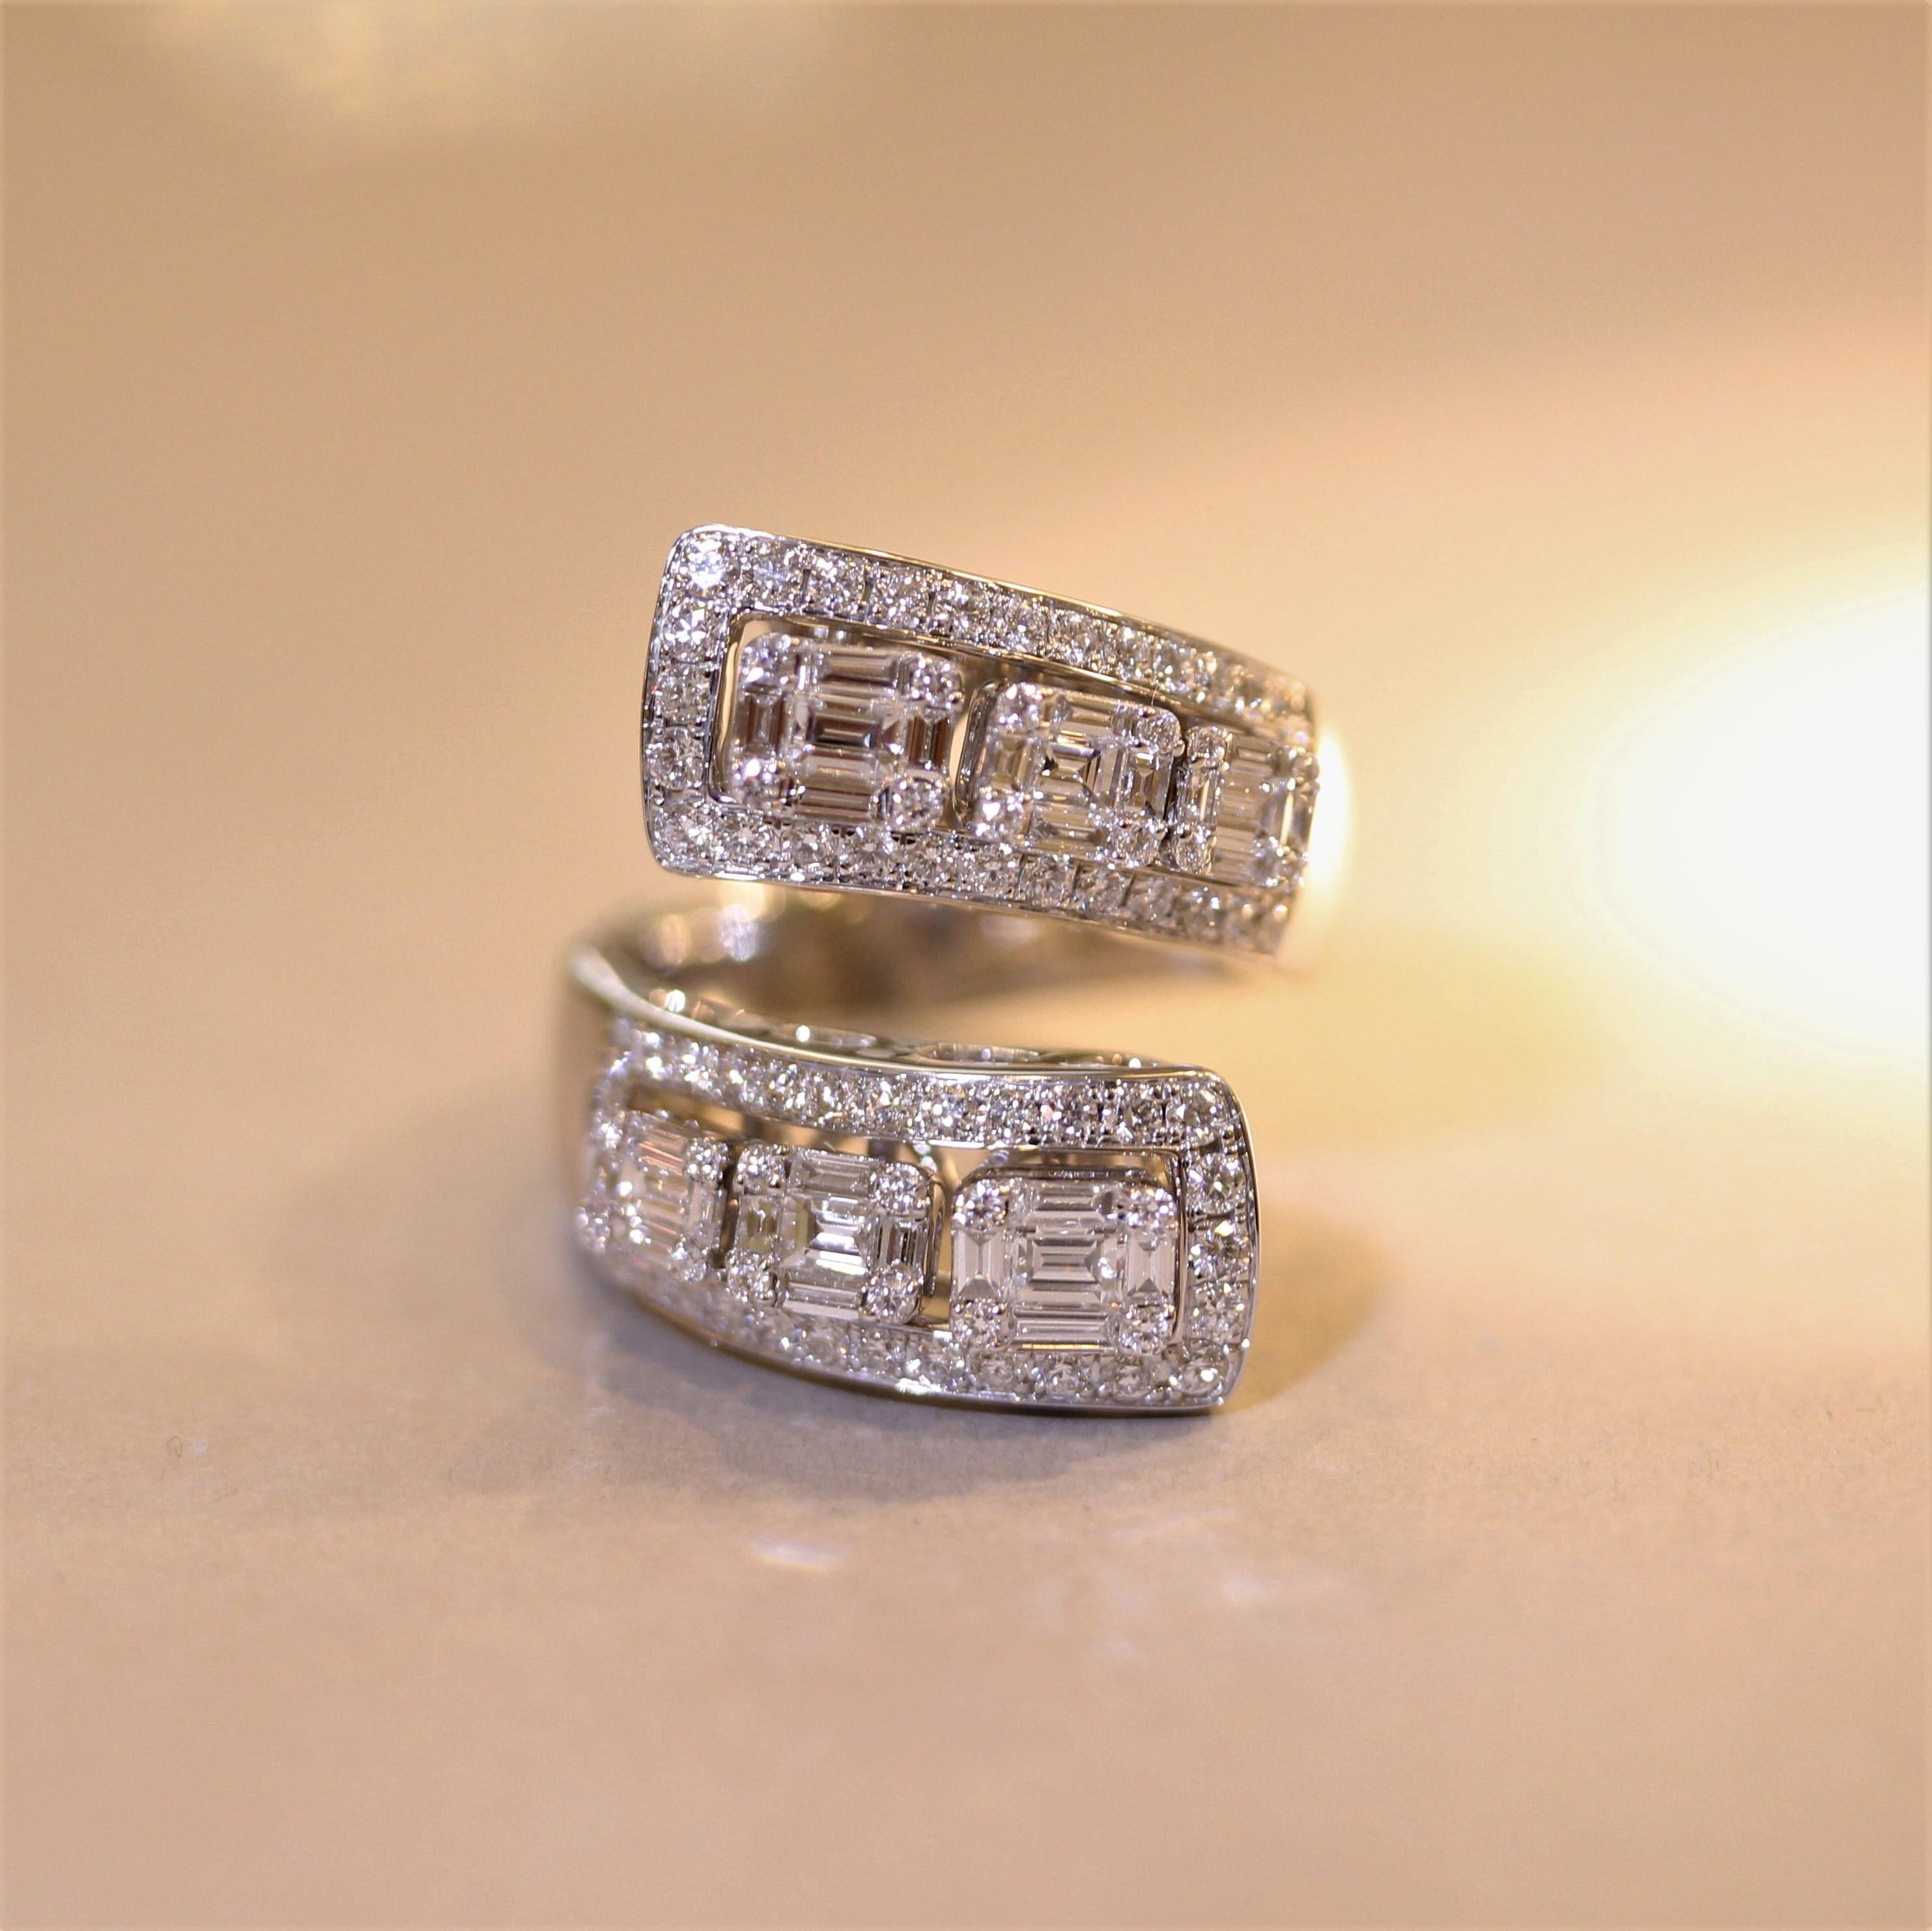 A unique, fine, and fun ring with movement! It features 2.90 carats of round brilliant-cut and baguette-cut diamonds. The two sides of the ring have 3 diamond studded gold studs that slide independently from one another. Secure in place and slides